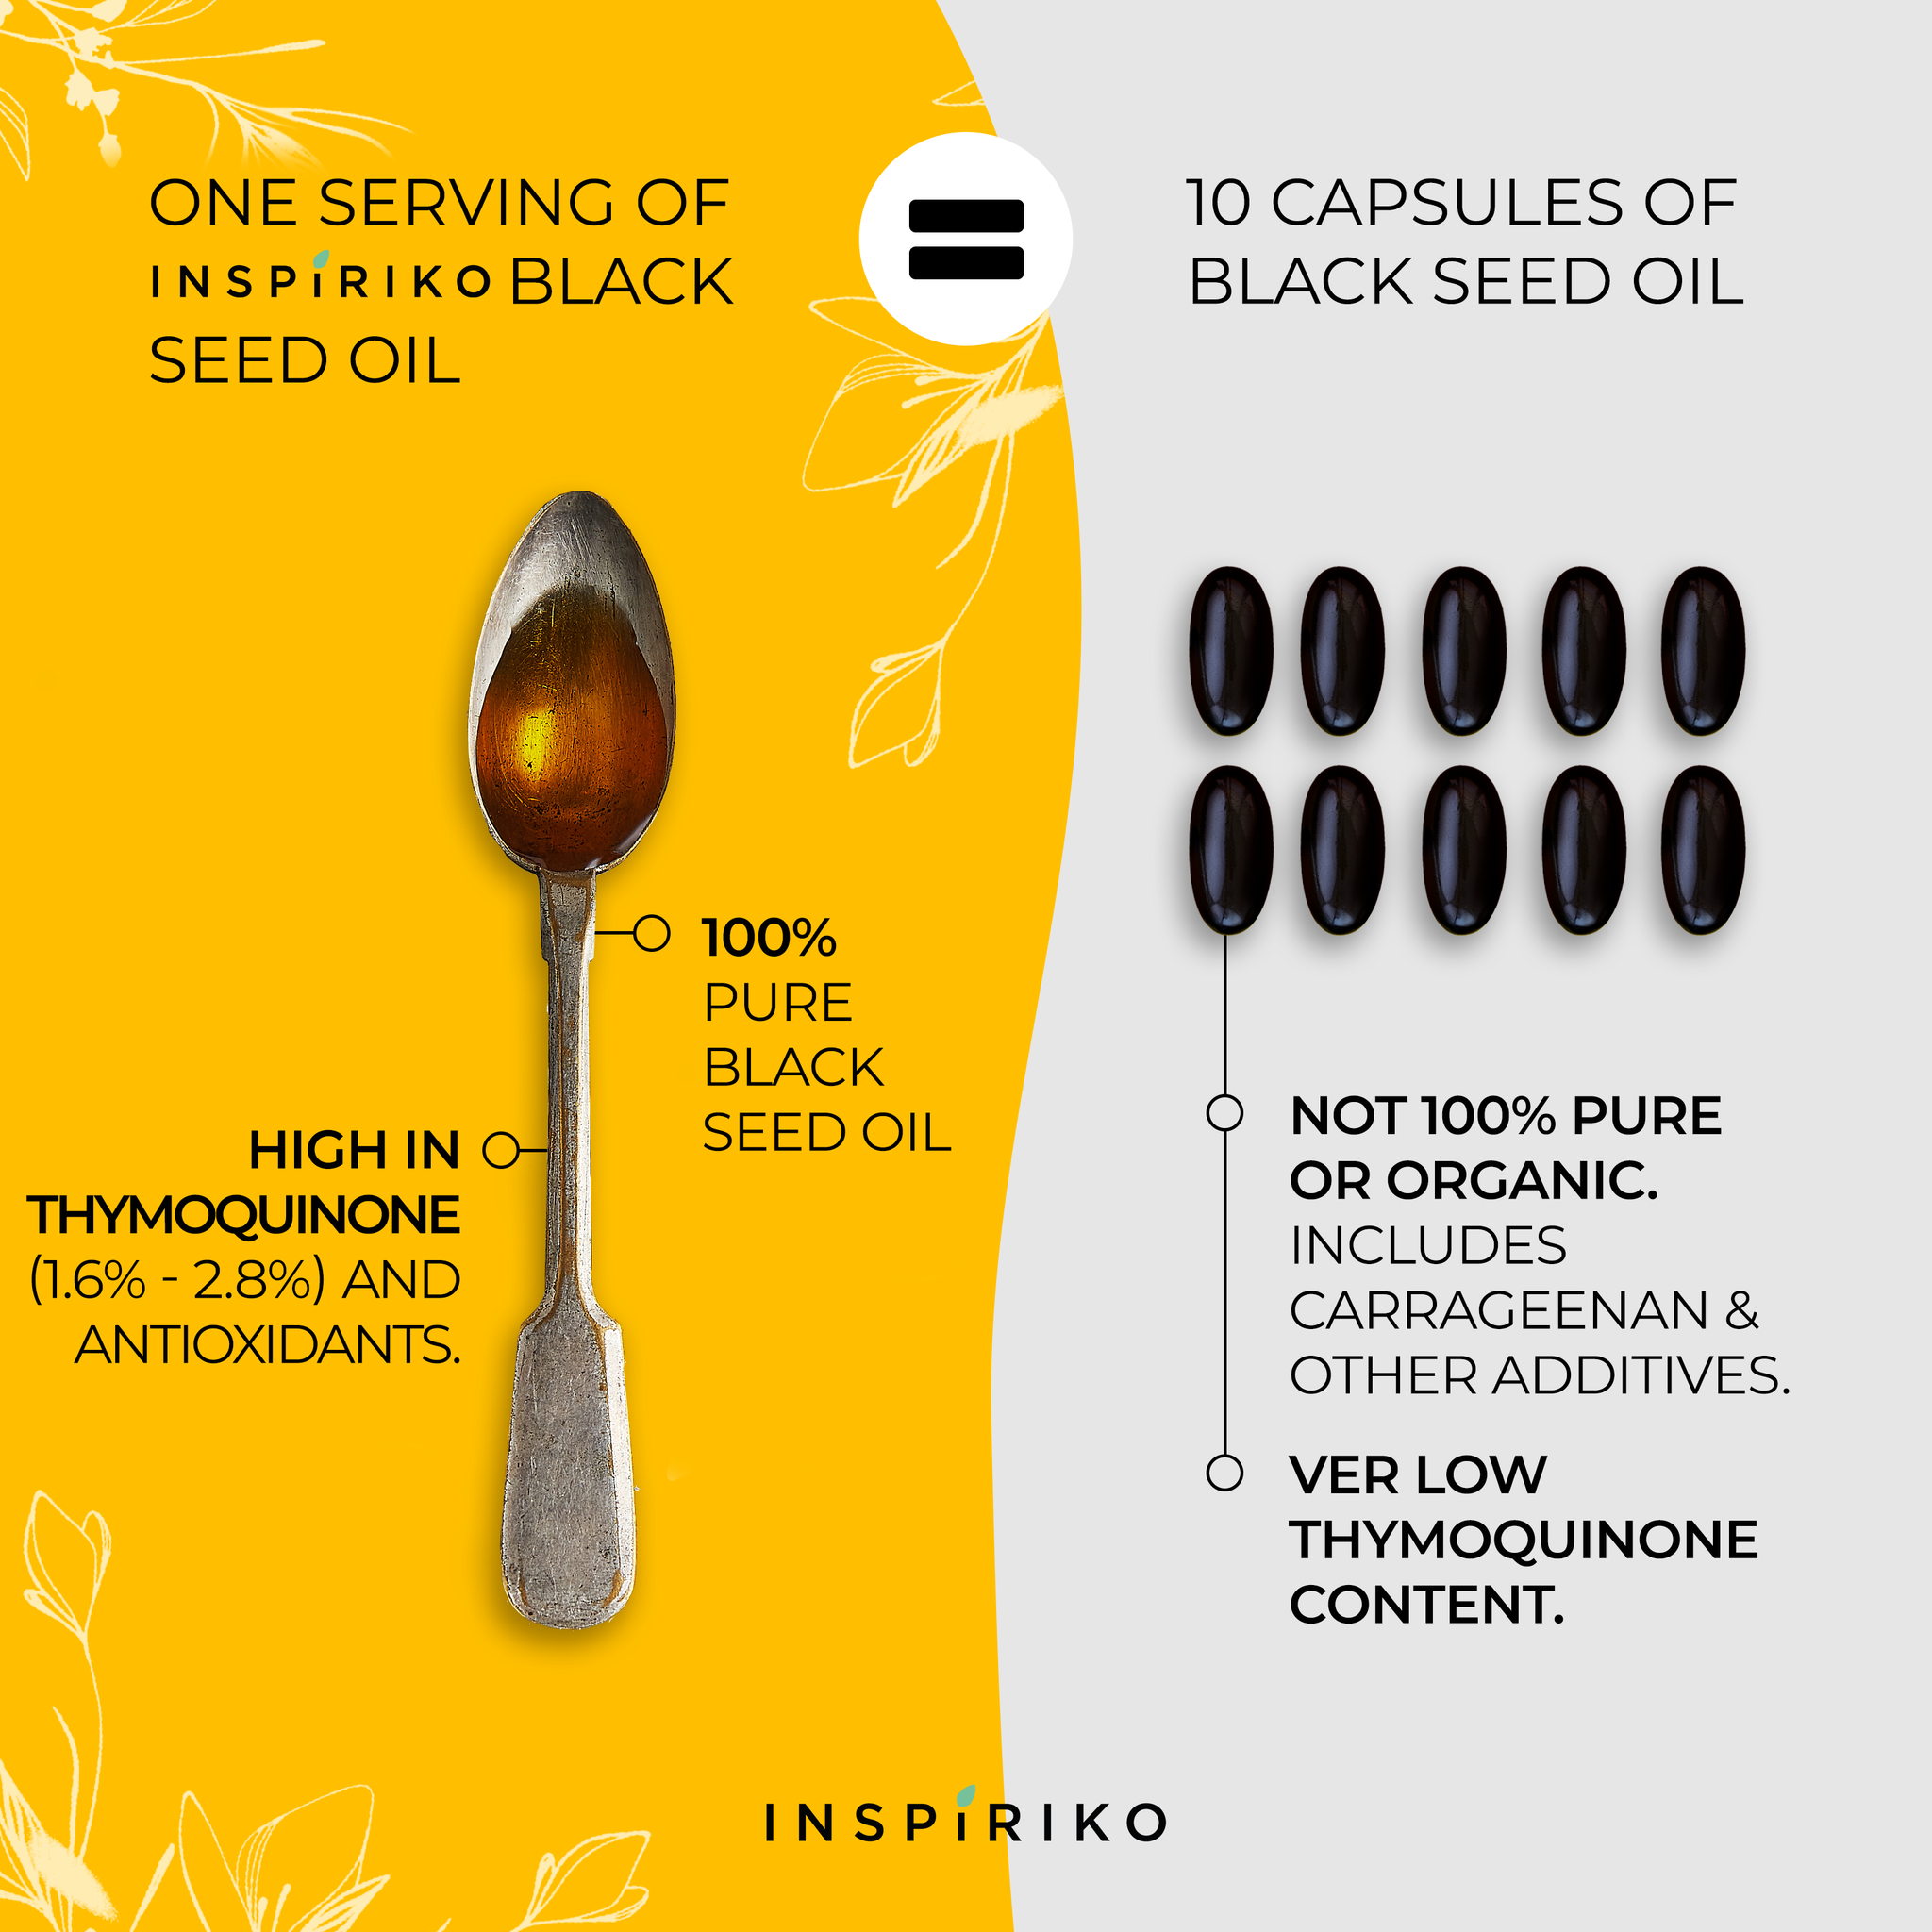 5 health benefits of black seed oil you should know